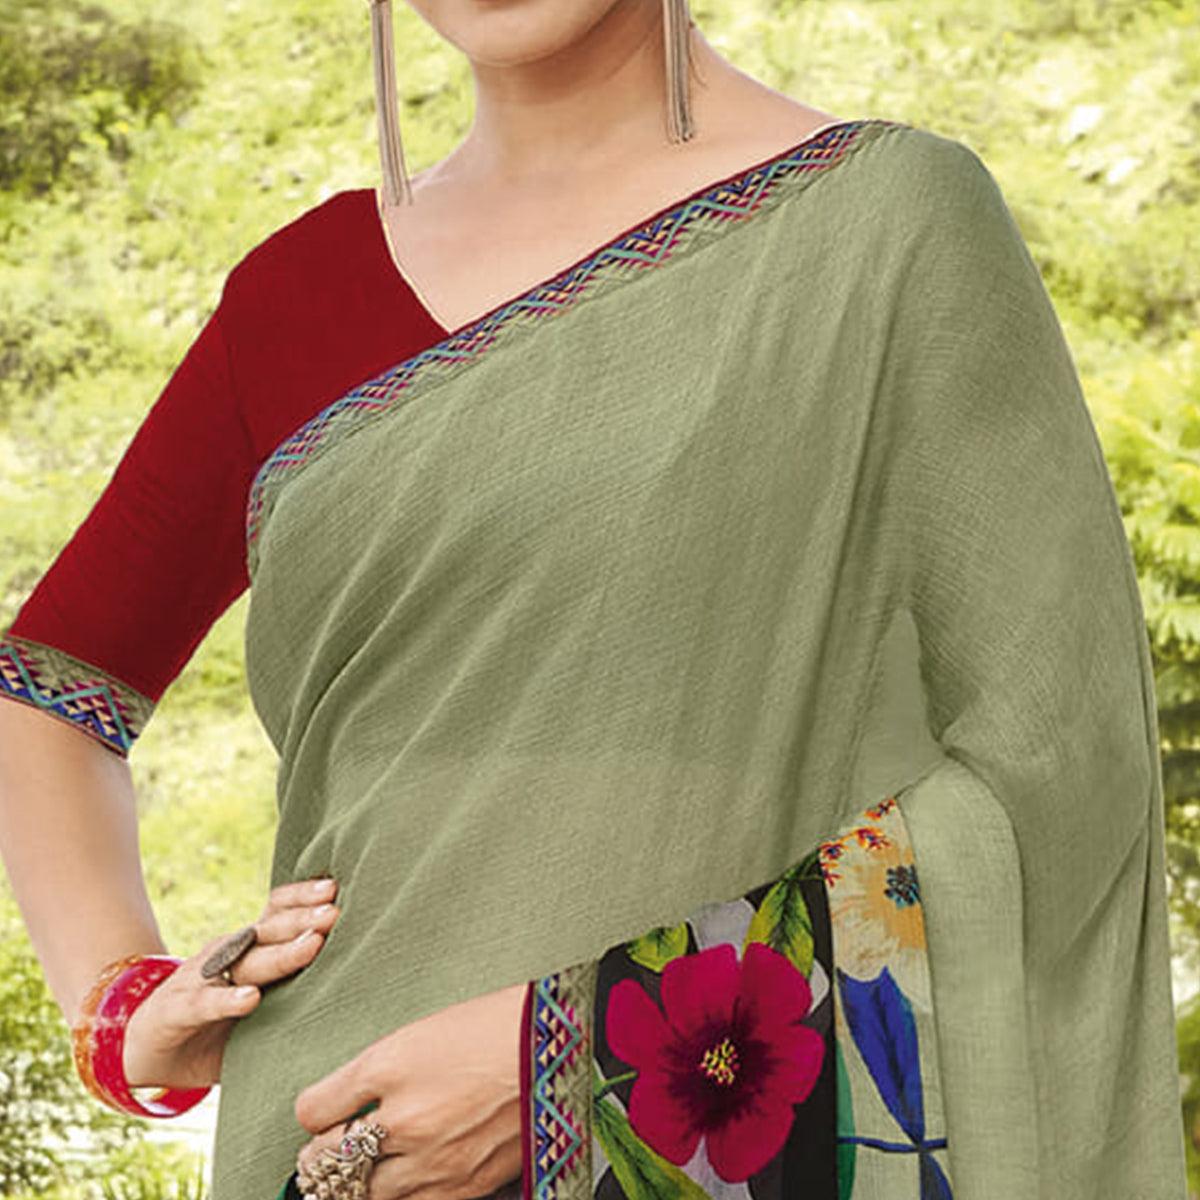 Dusty Green - Multicolored Partywear Floral Printed Chiffon Saree - Peachmode